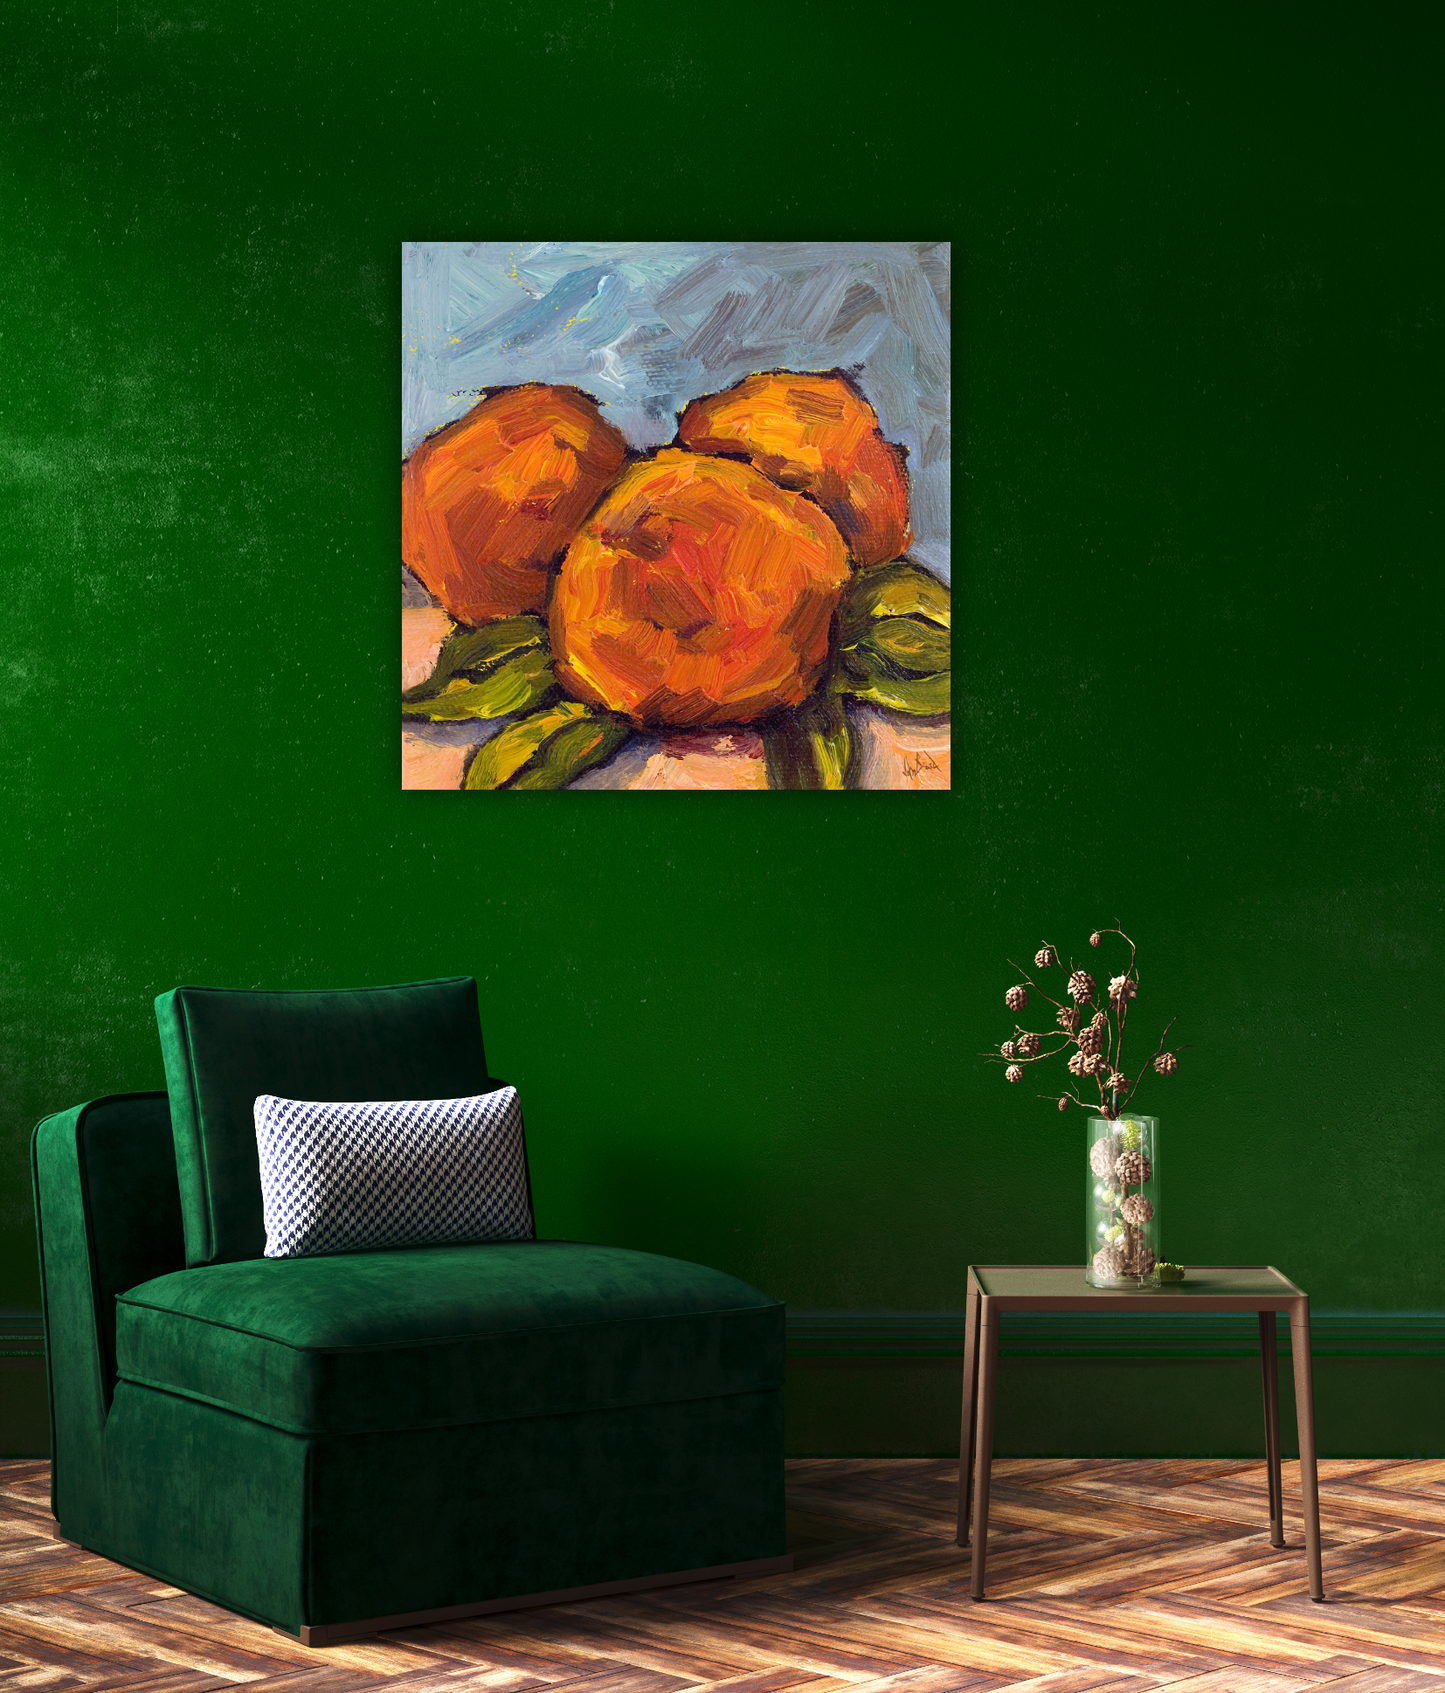 Peaches Glossy Poster Print